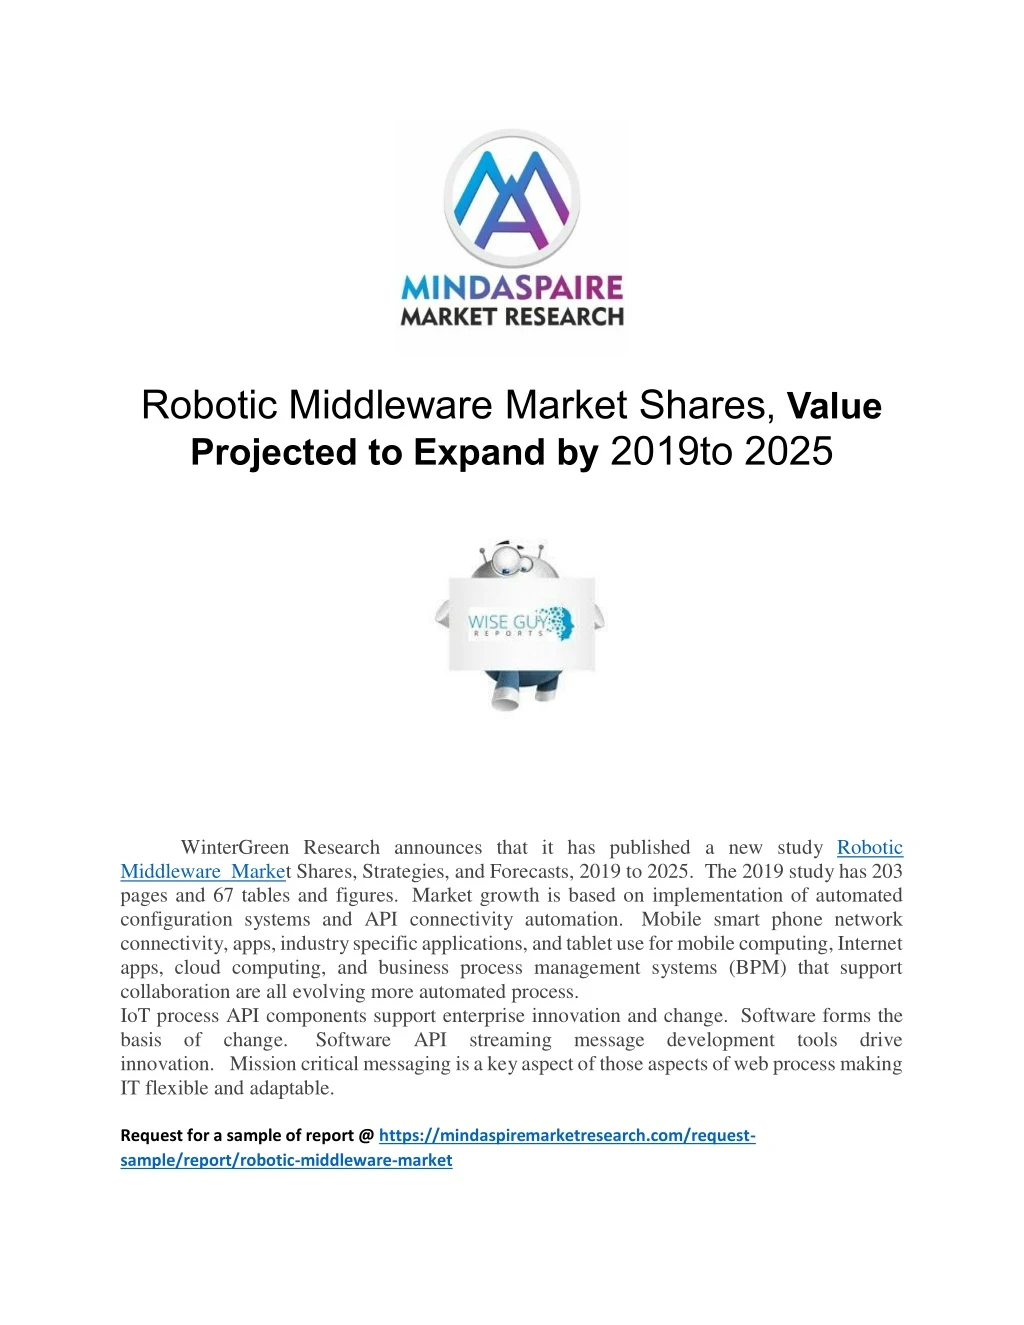 robotic middleware market shares value projected